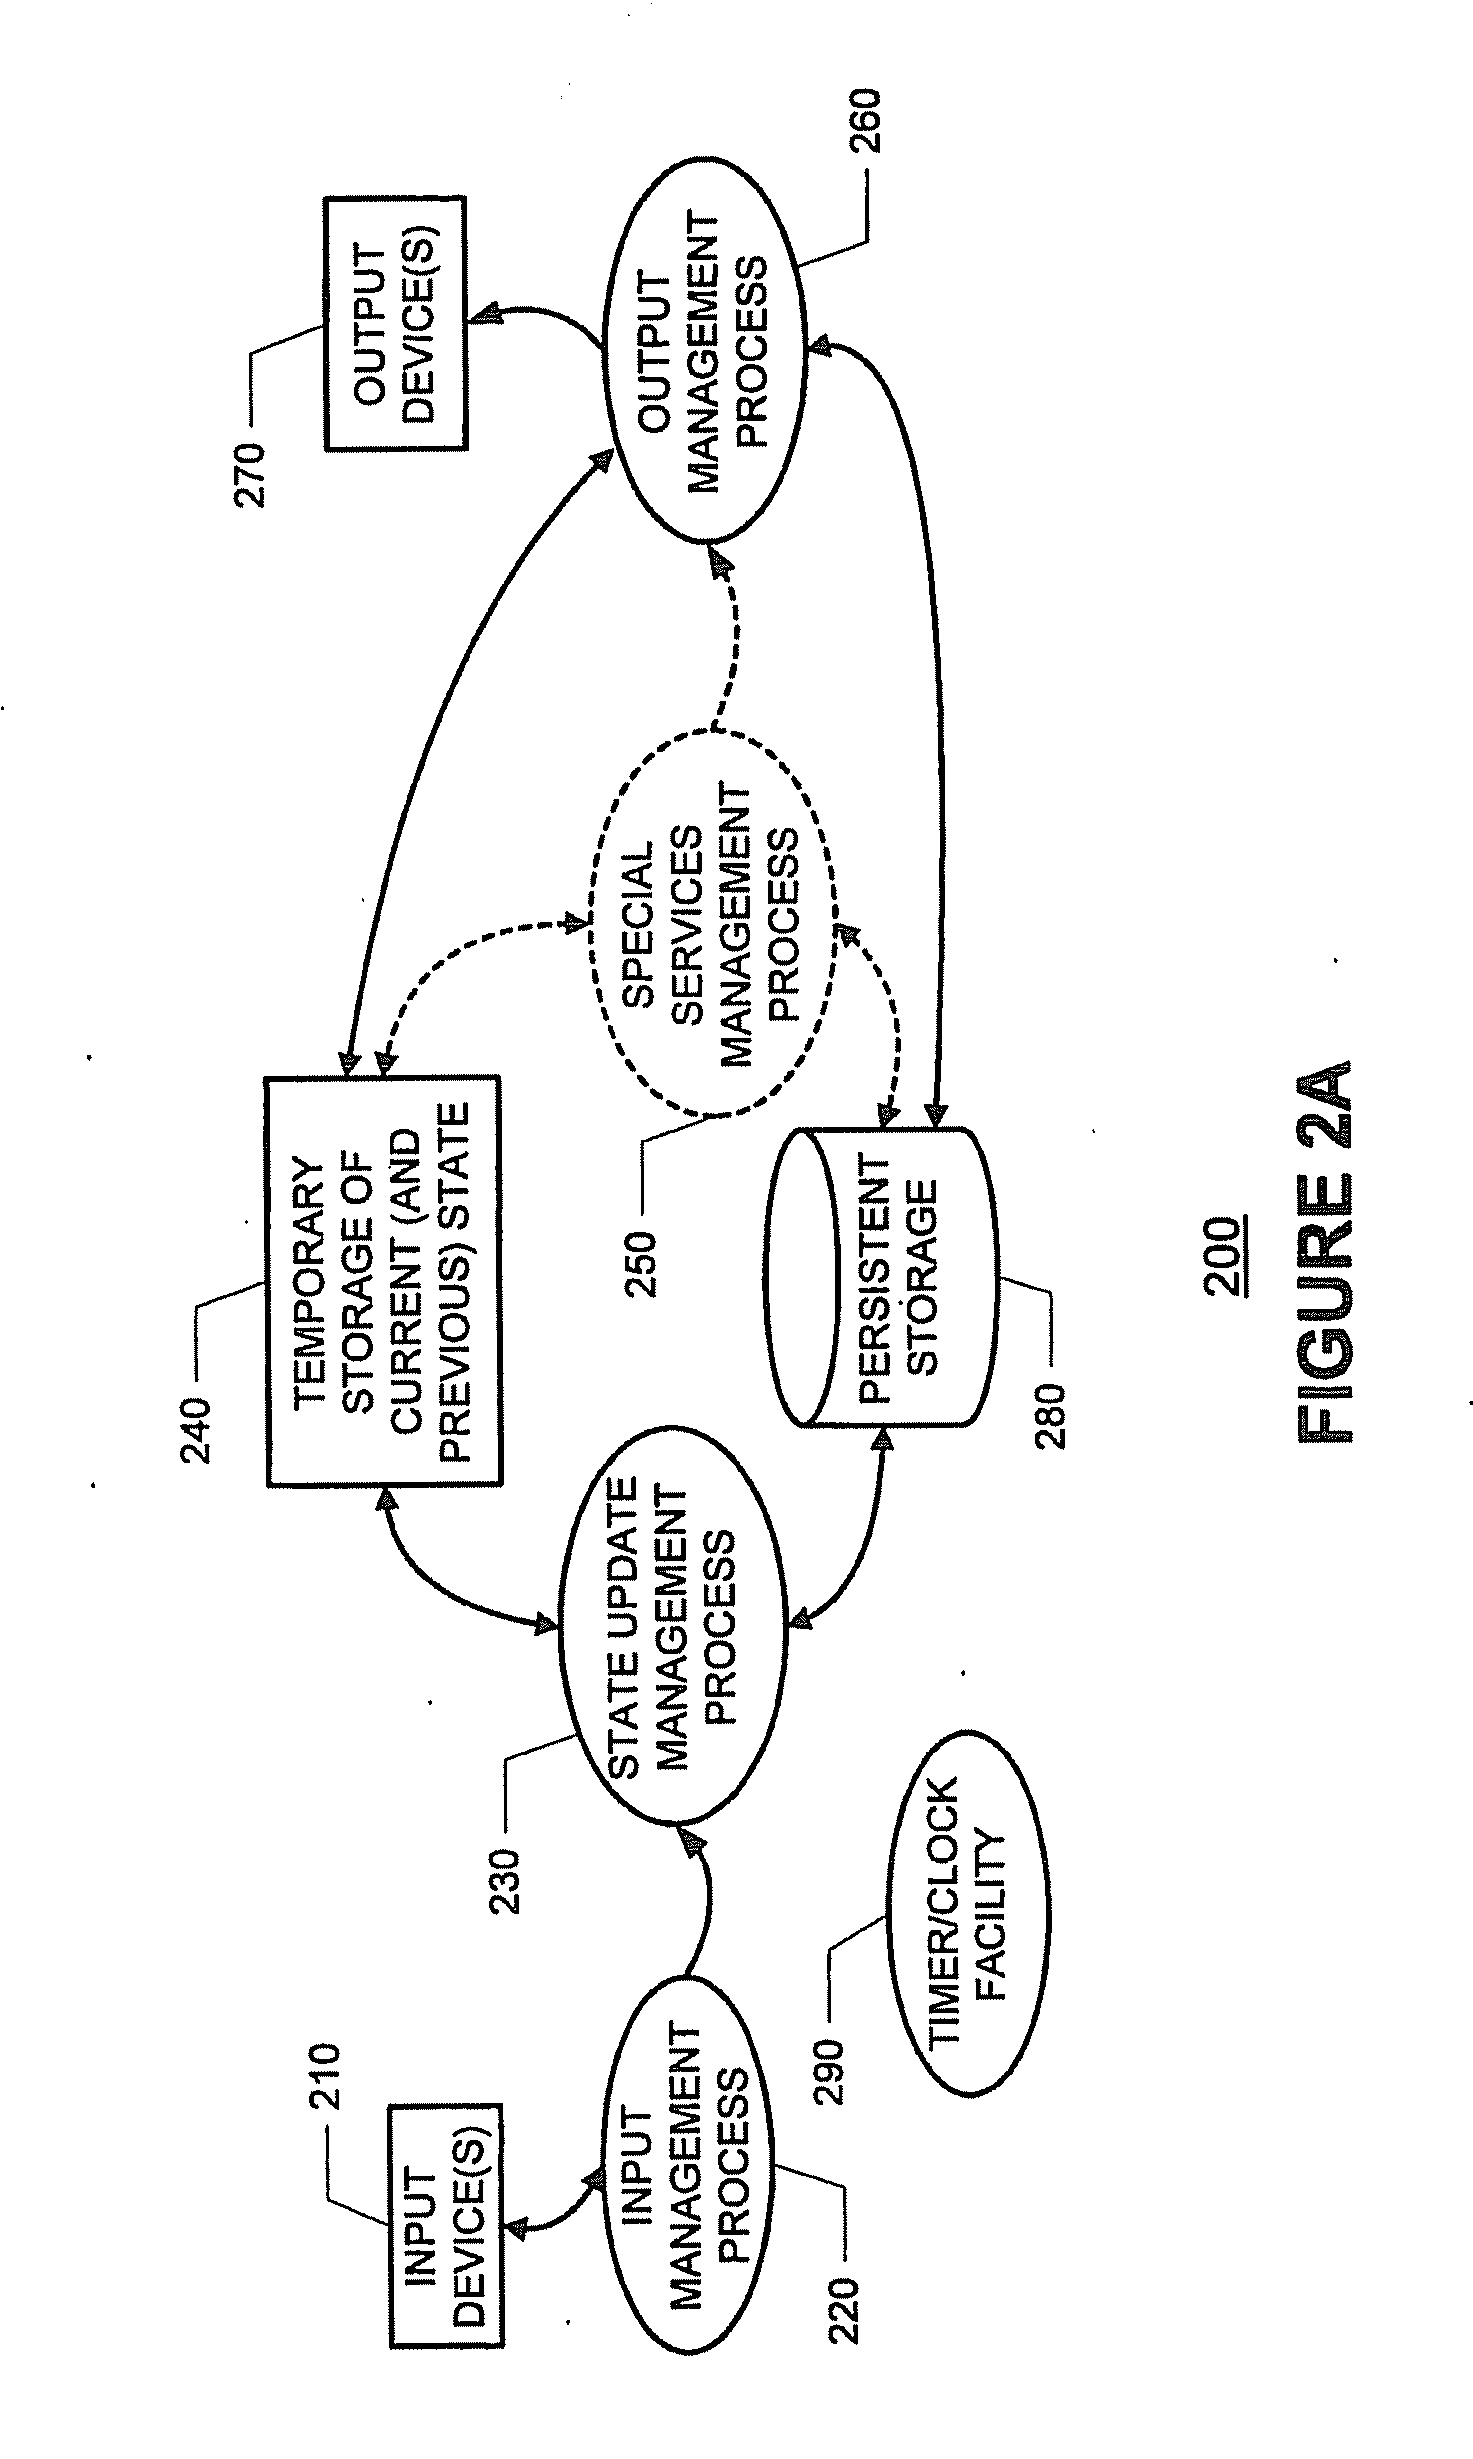 Methods, apparatus and data structures for providing a user interface to objects, the user interface exploiting spatial memory and visually indicating at least one object parameter